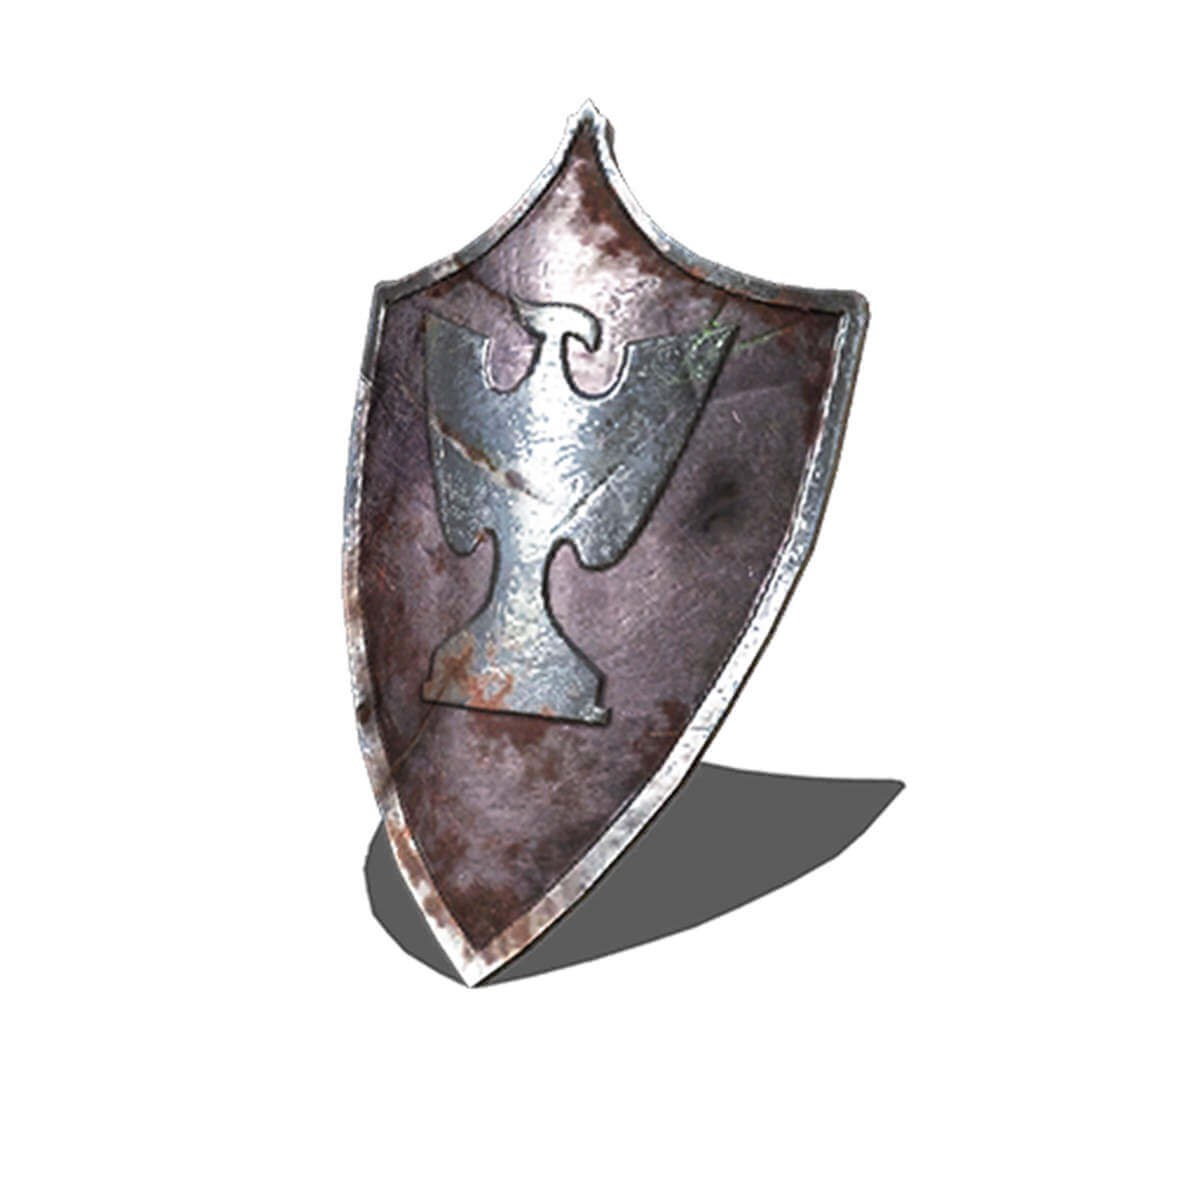 Elden Ring Best Shields and How to Get Them